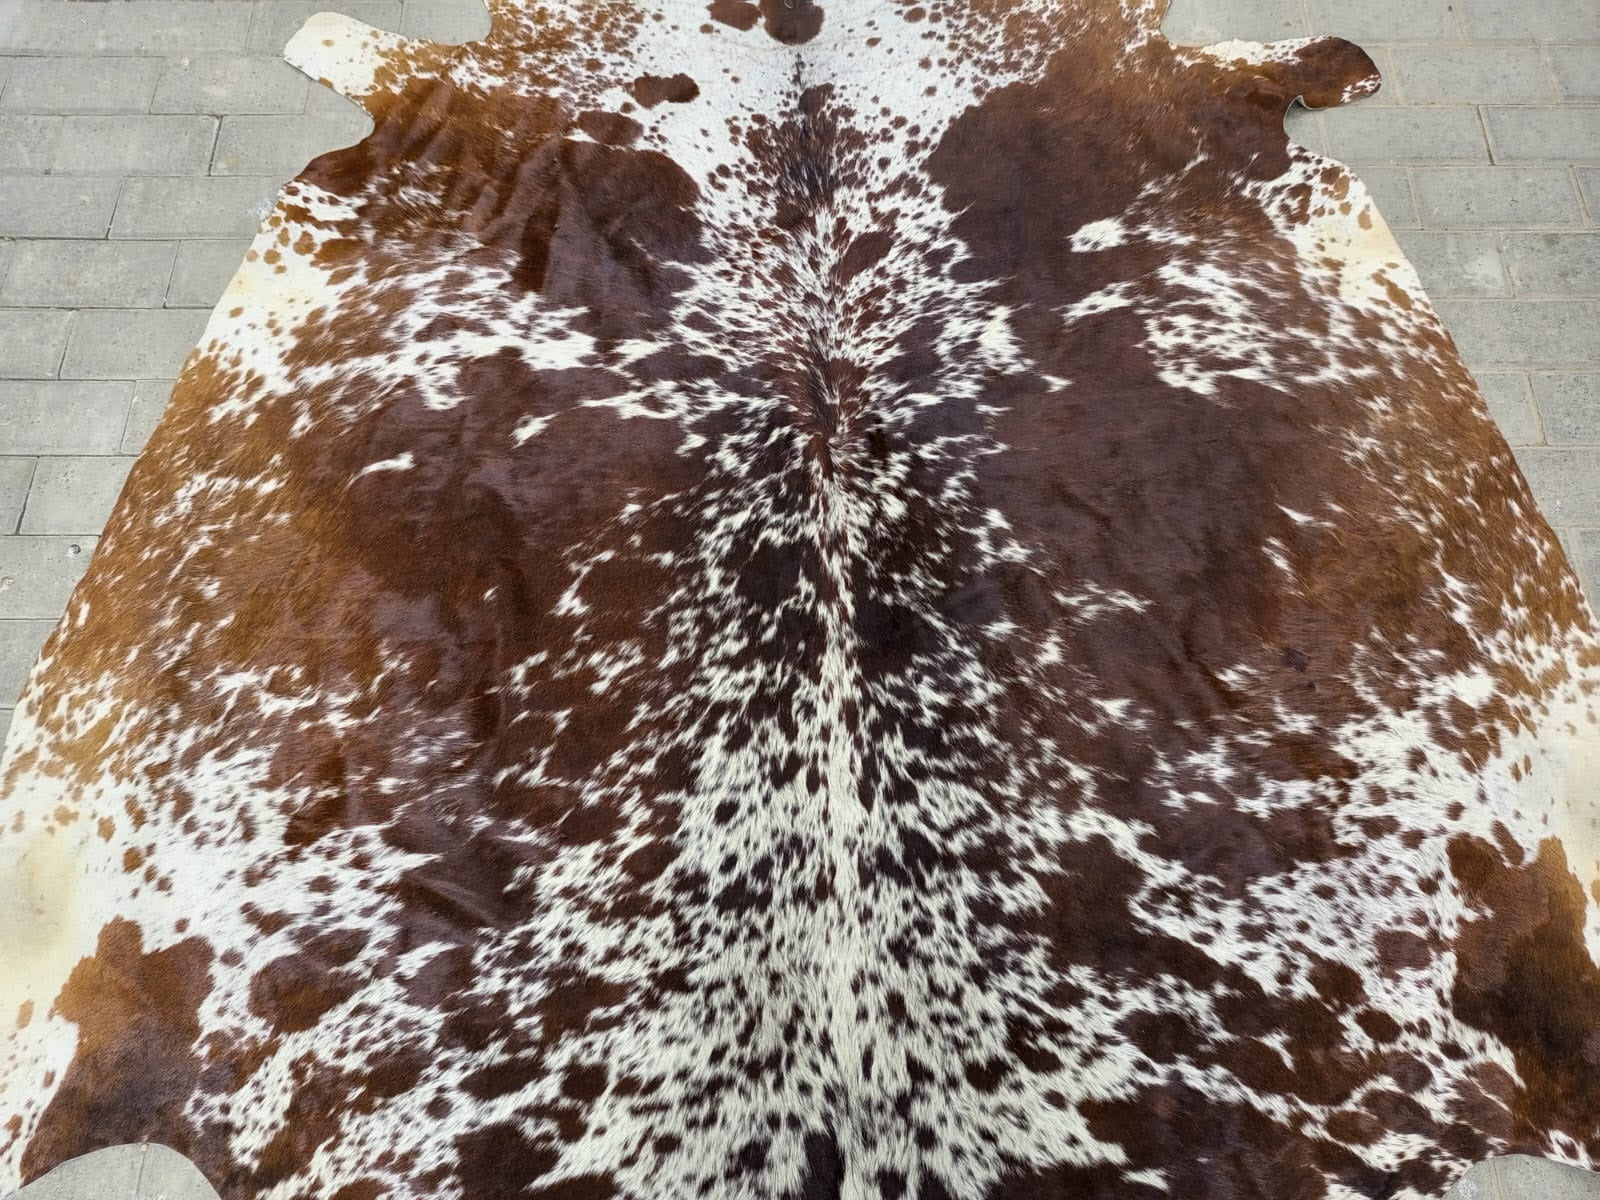 tricolor cowhide rug bedroom rug Livingroom rug cowhide rug brown bedroom rug large rug area rugs exquisite rugs natural rugs unique rugs home décor